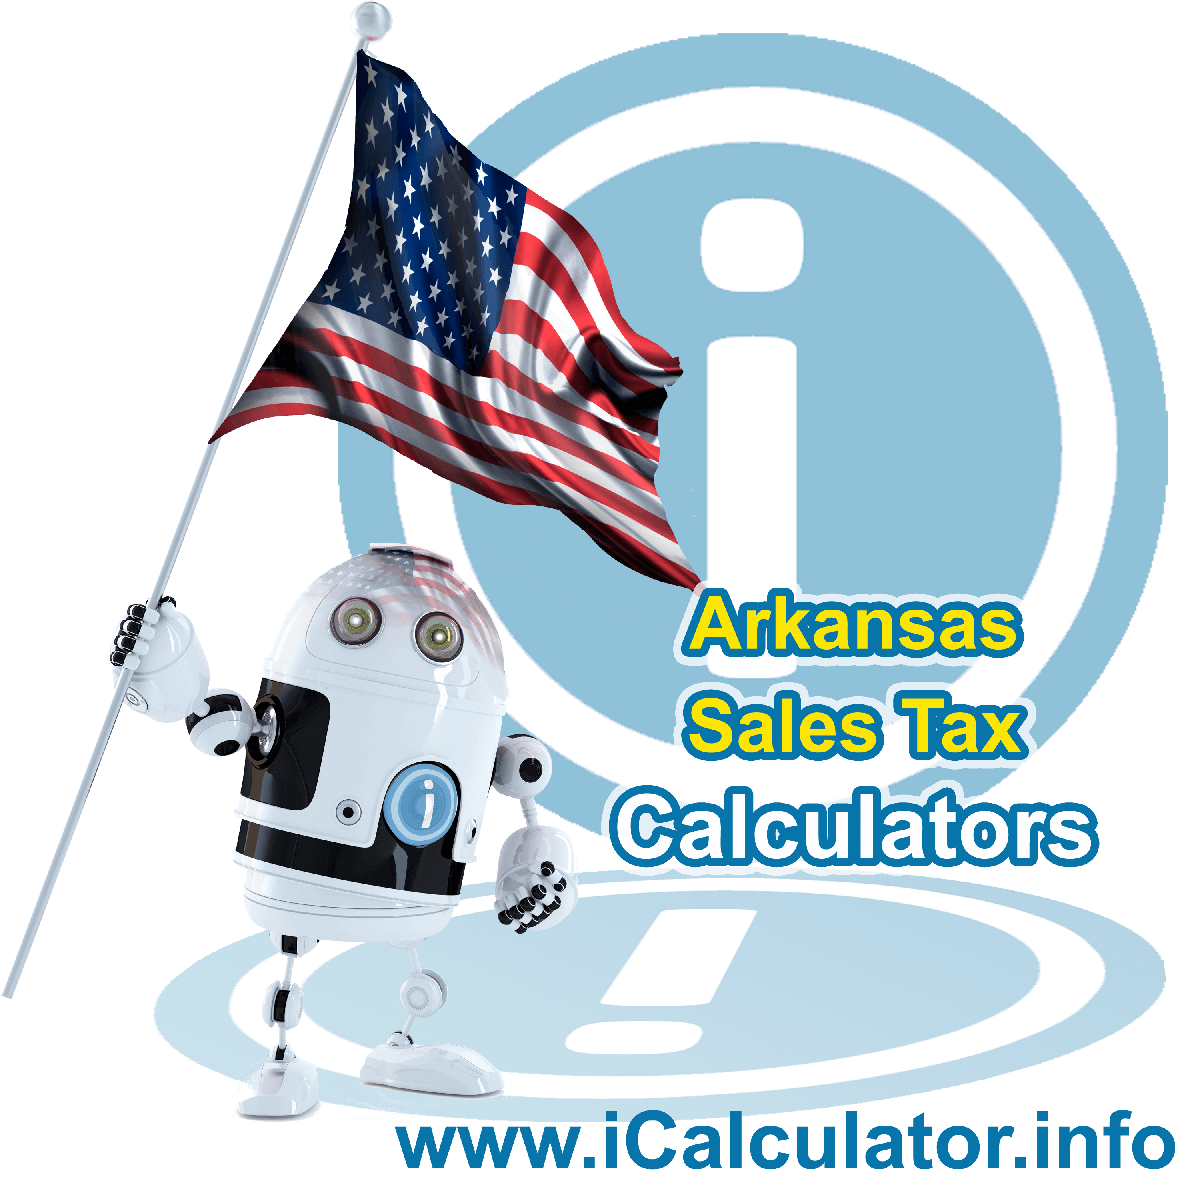 Hensley Sales Rates: This image illustrates a calculator robot calculating Hensley sales tax manually using the Hensley Sales Tax Formula. You can use this information to calculate Hensley Sales Tax manually or use the Hensley Sales Tax Calculator to calculate sales tax online.